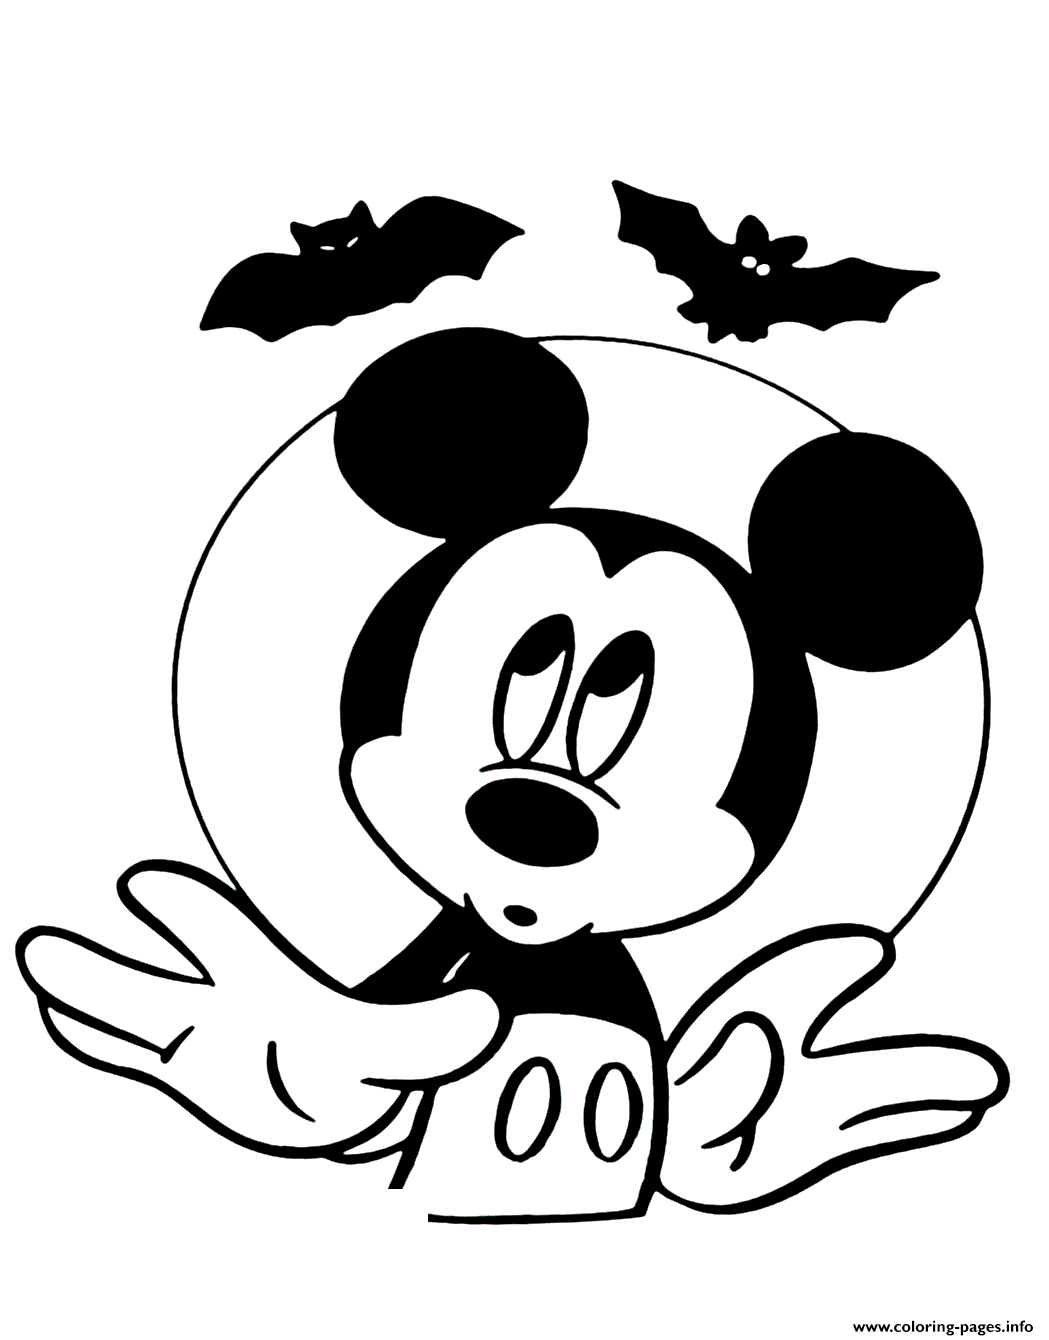 kaboose coloring pages halloween mickey - photo #49